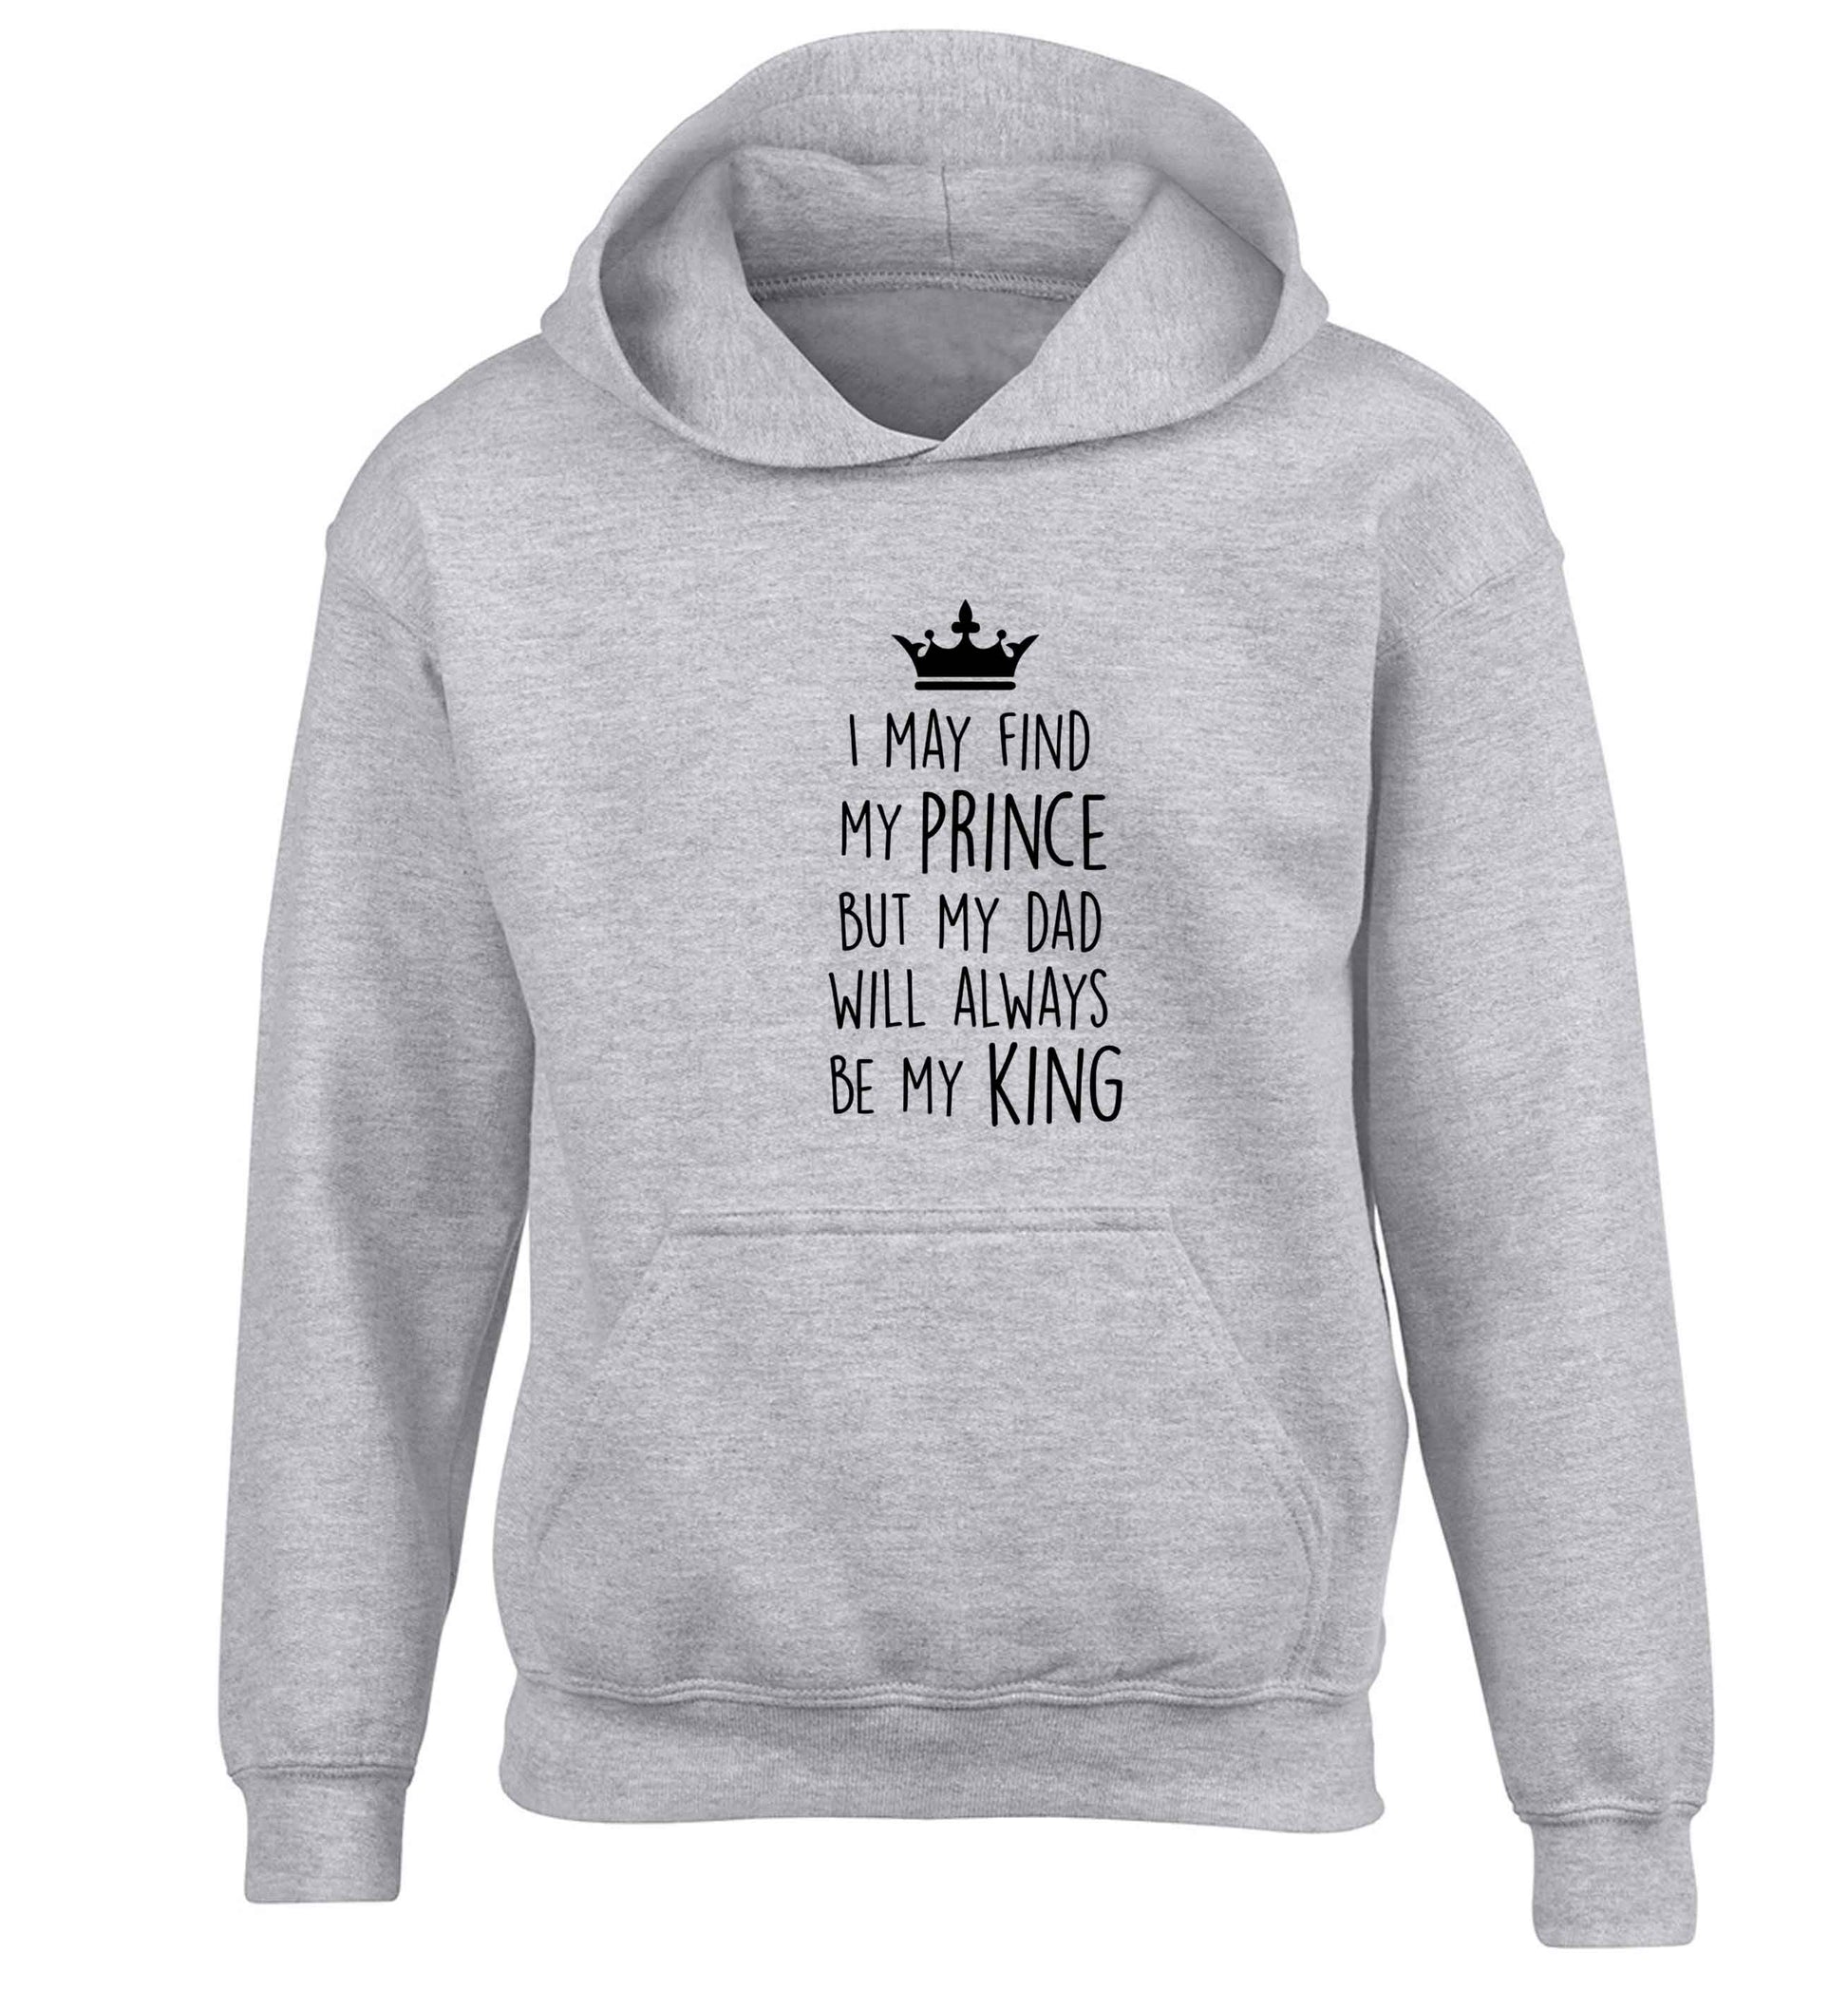 I may find my prince but my dad will always be my king children's grey hoodie 12-13 Years